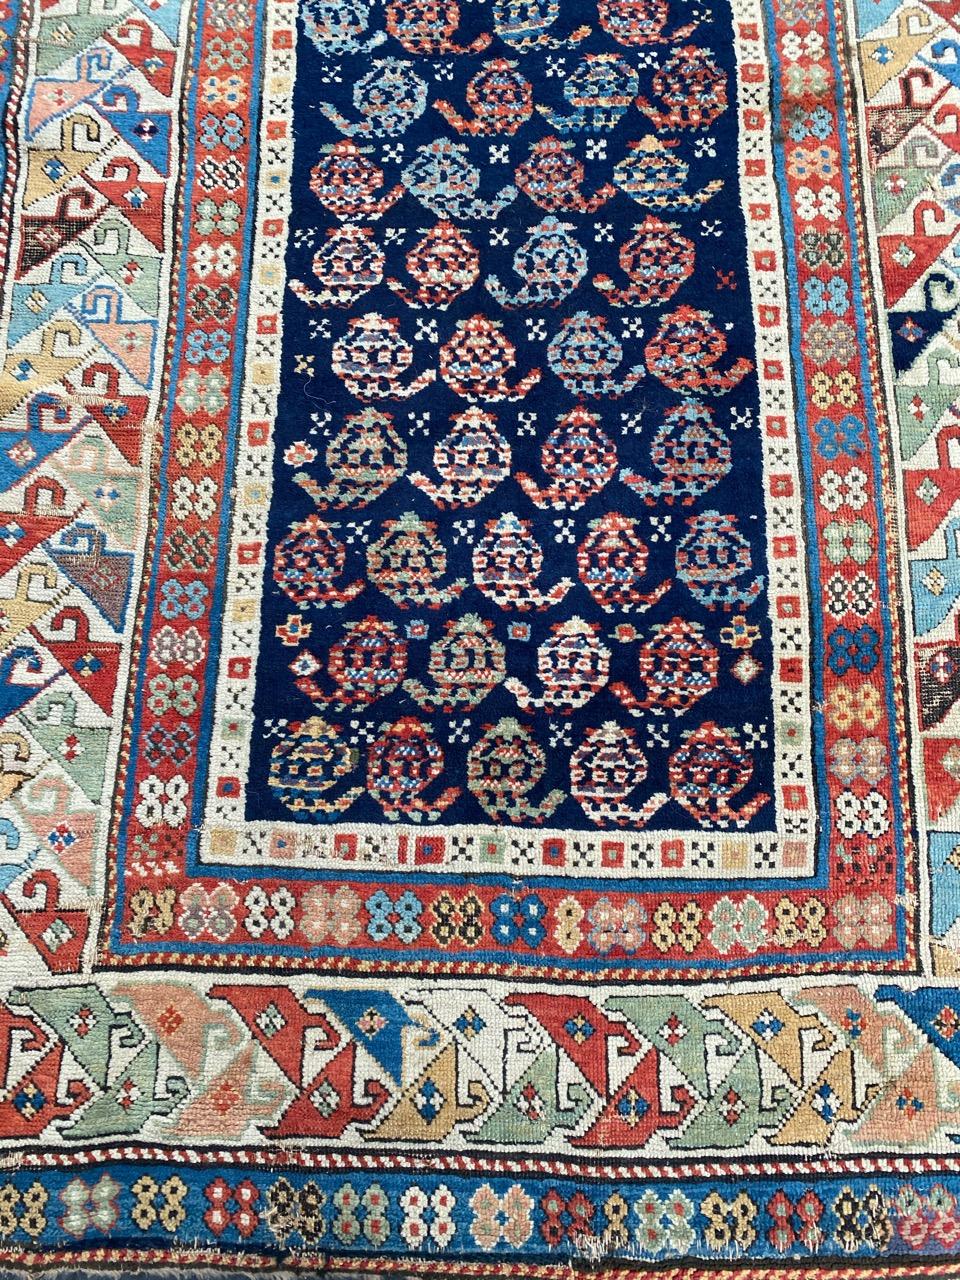 Beautiful 19th century Kazak rug with a nice geometrical and decorative design and beautiful natural colors, entirely hand knotted with wool velvet on wool foundation.

✨✨✨
